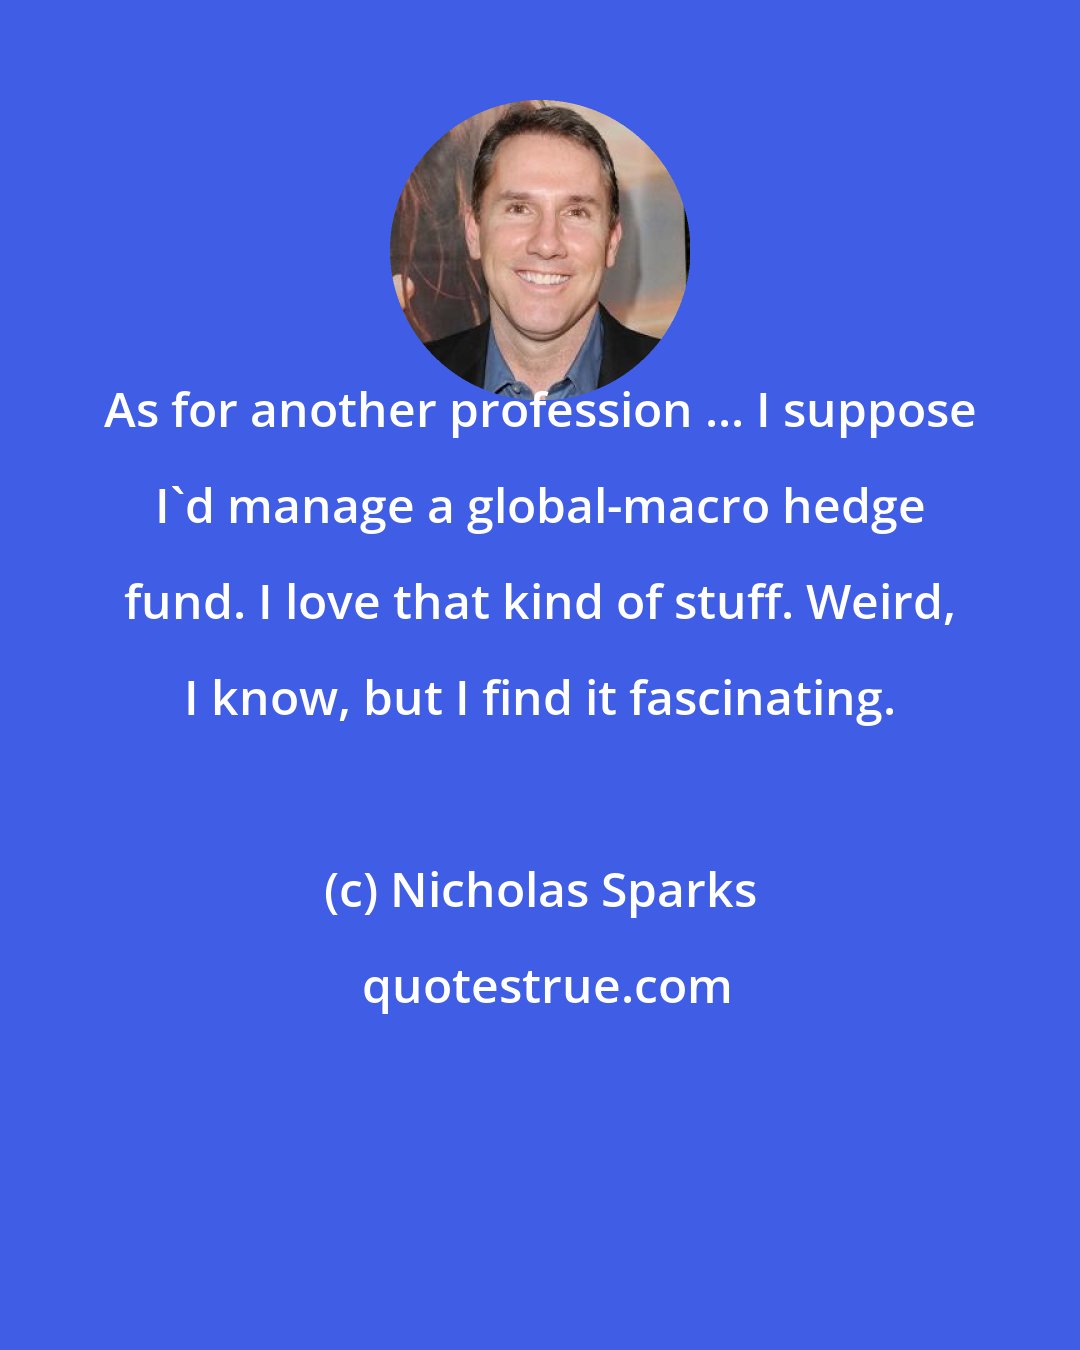 Nicholas Sparks: As for another profession ... I suppose I'd manage a global-macro hedge fund. I love that kind of stuff. Weird, I know, but I find it fascinating.